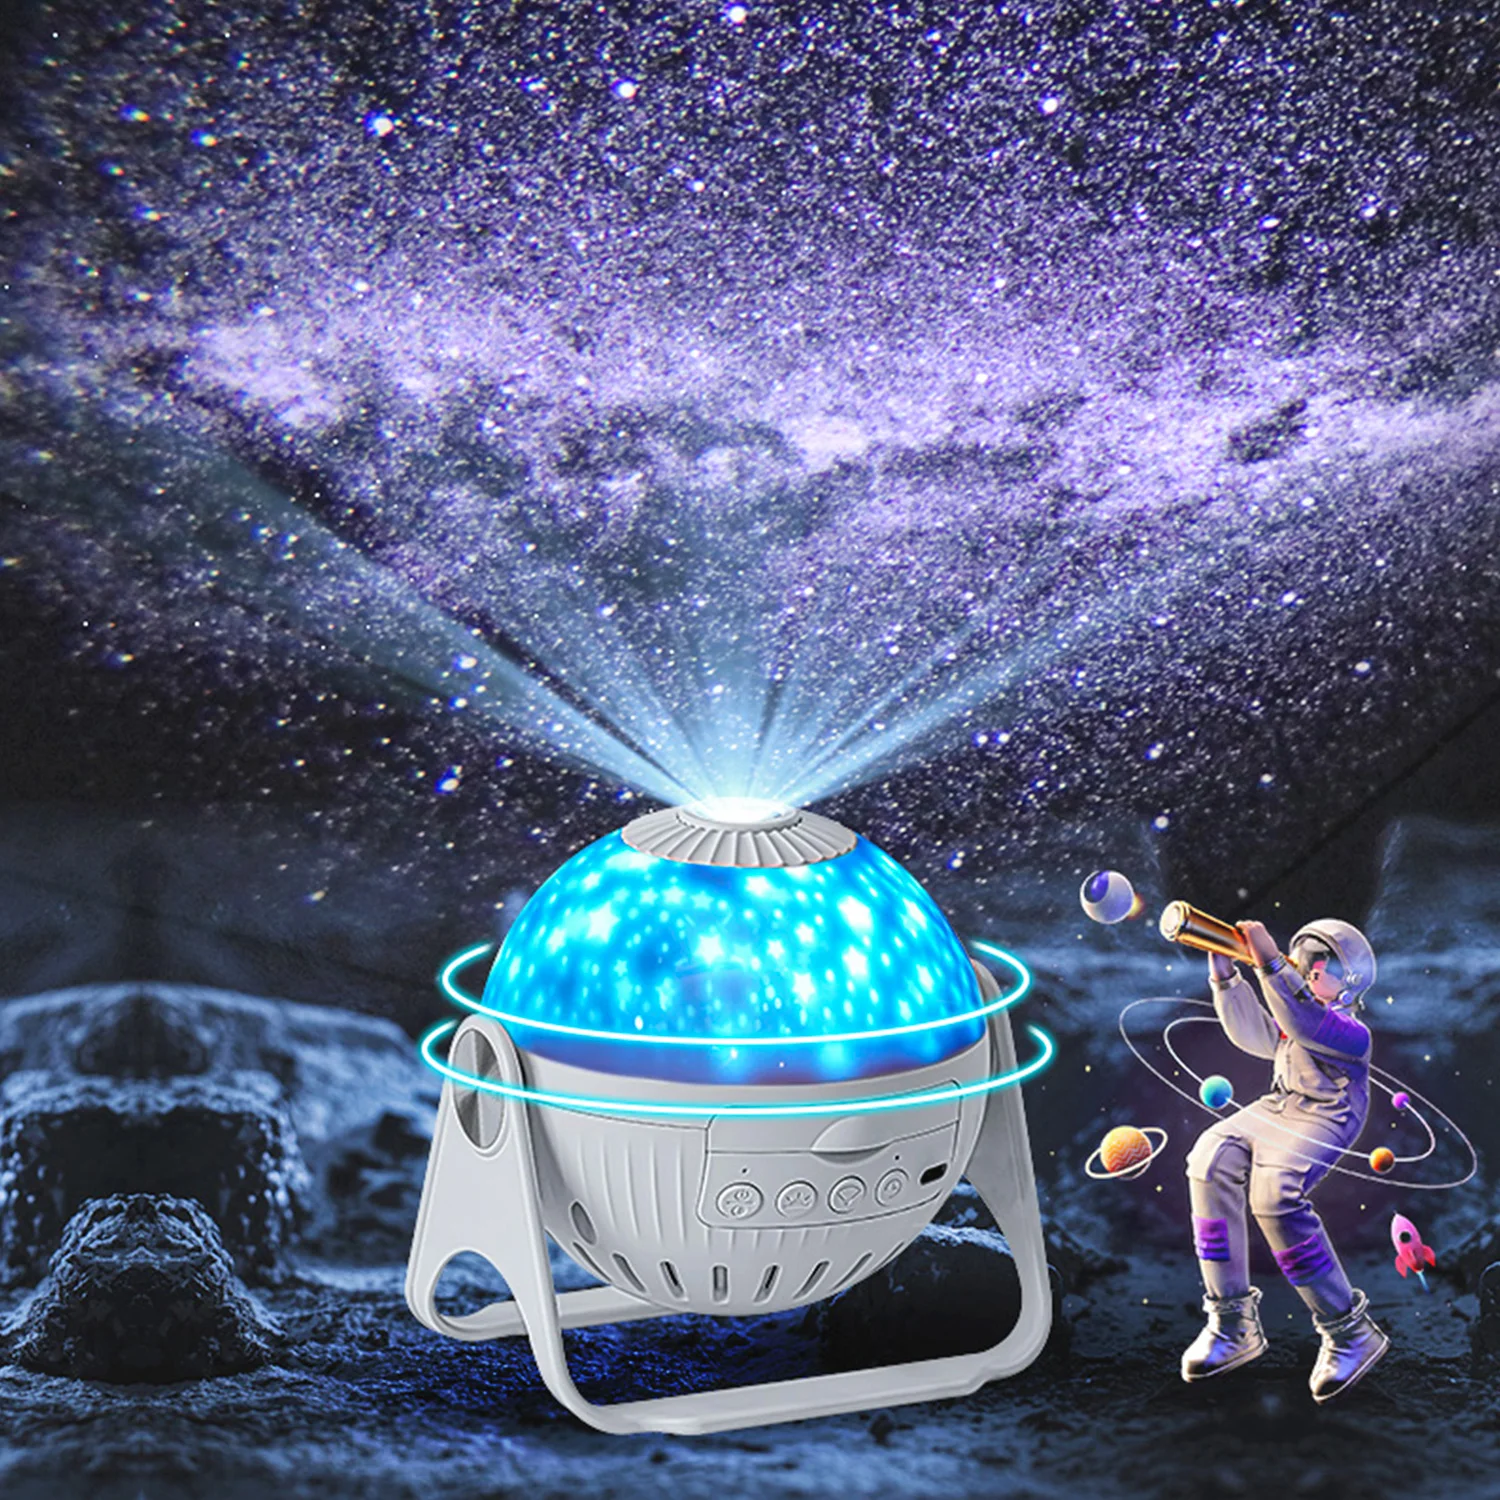 klinker vergroting bout Star Projector 3 In 1 Galaxy Night Light Projector Wireless Music Speaker  Galaxy/moon/starry For Kids Baby Teen Adults - Buy Led Projector  Light,Galaxy Projector Light,Star Projector Lights Product on Alibaba.com